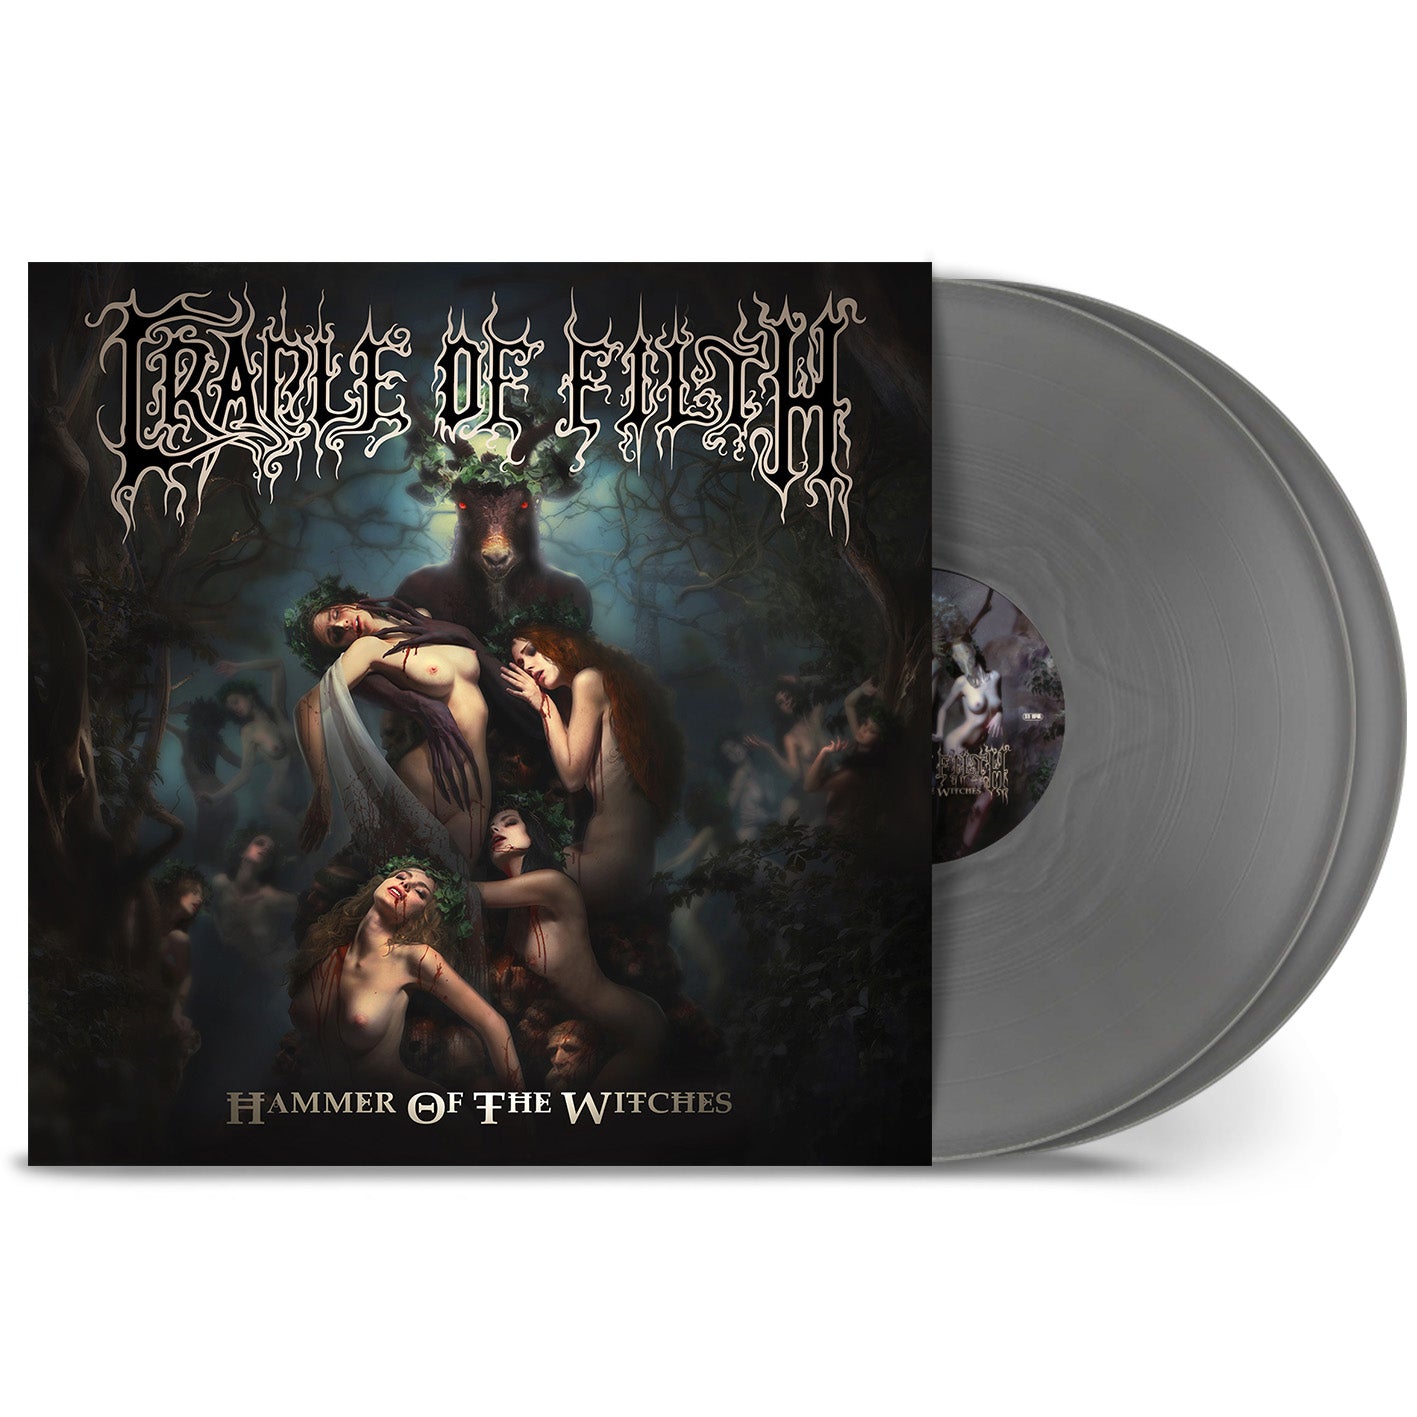 Cradle Of Filth "Hammer Of The Witches" 2x12" Silver Vinyl - PRE-ORDER